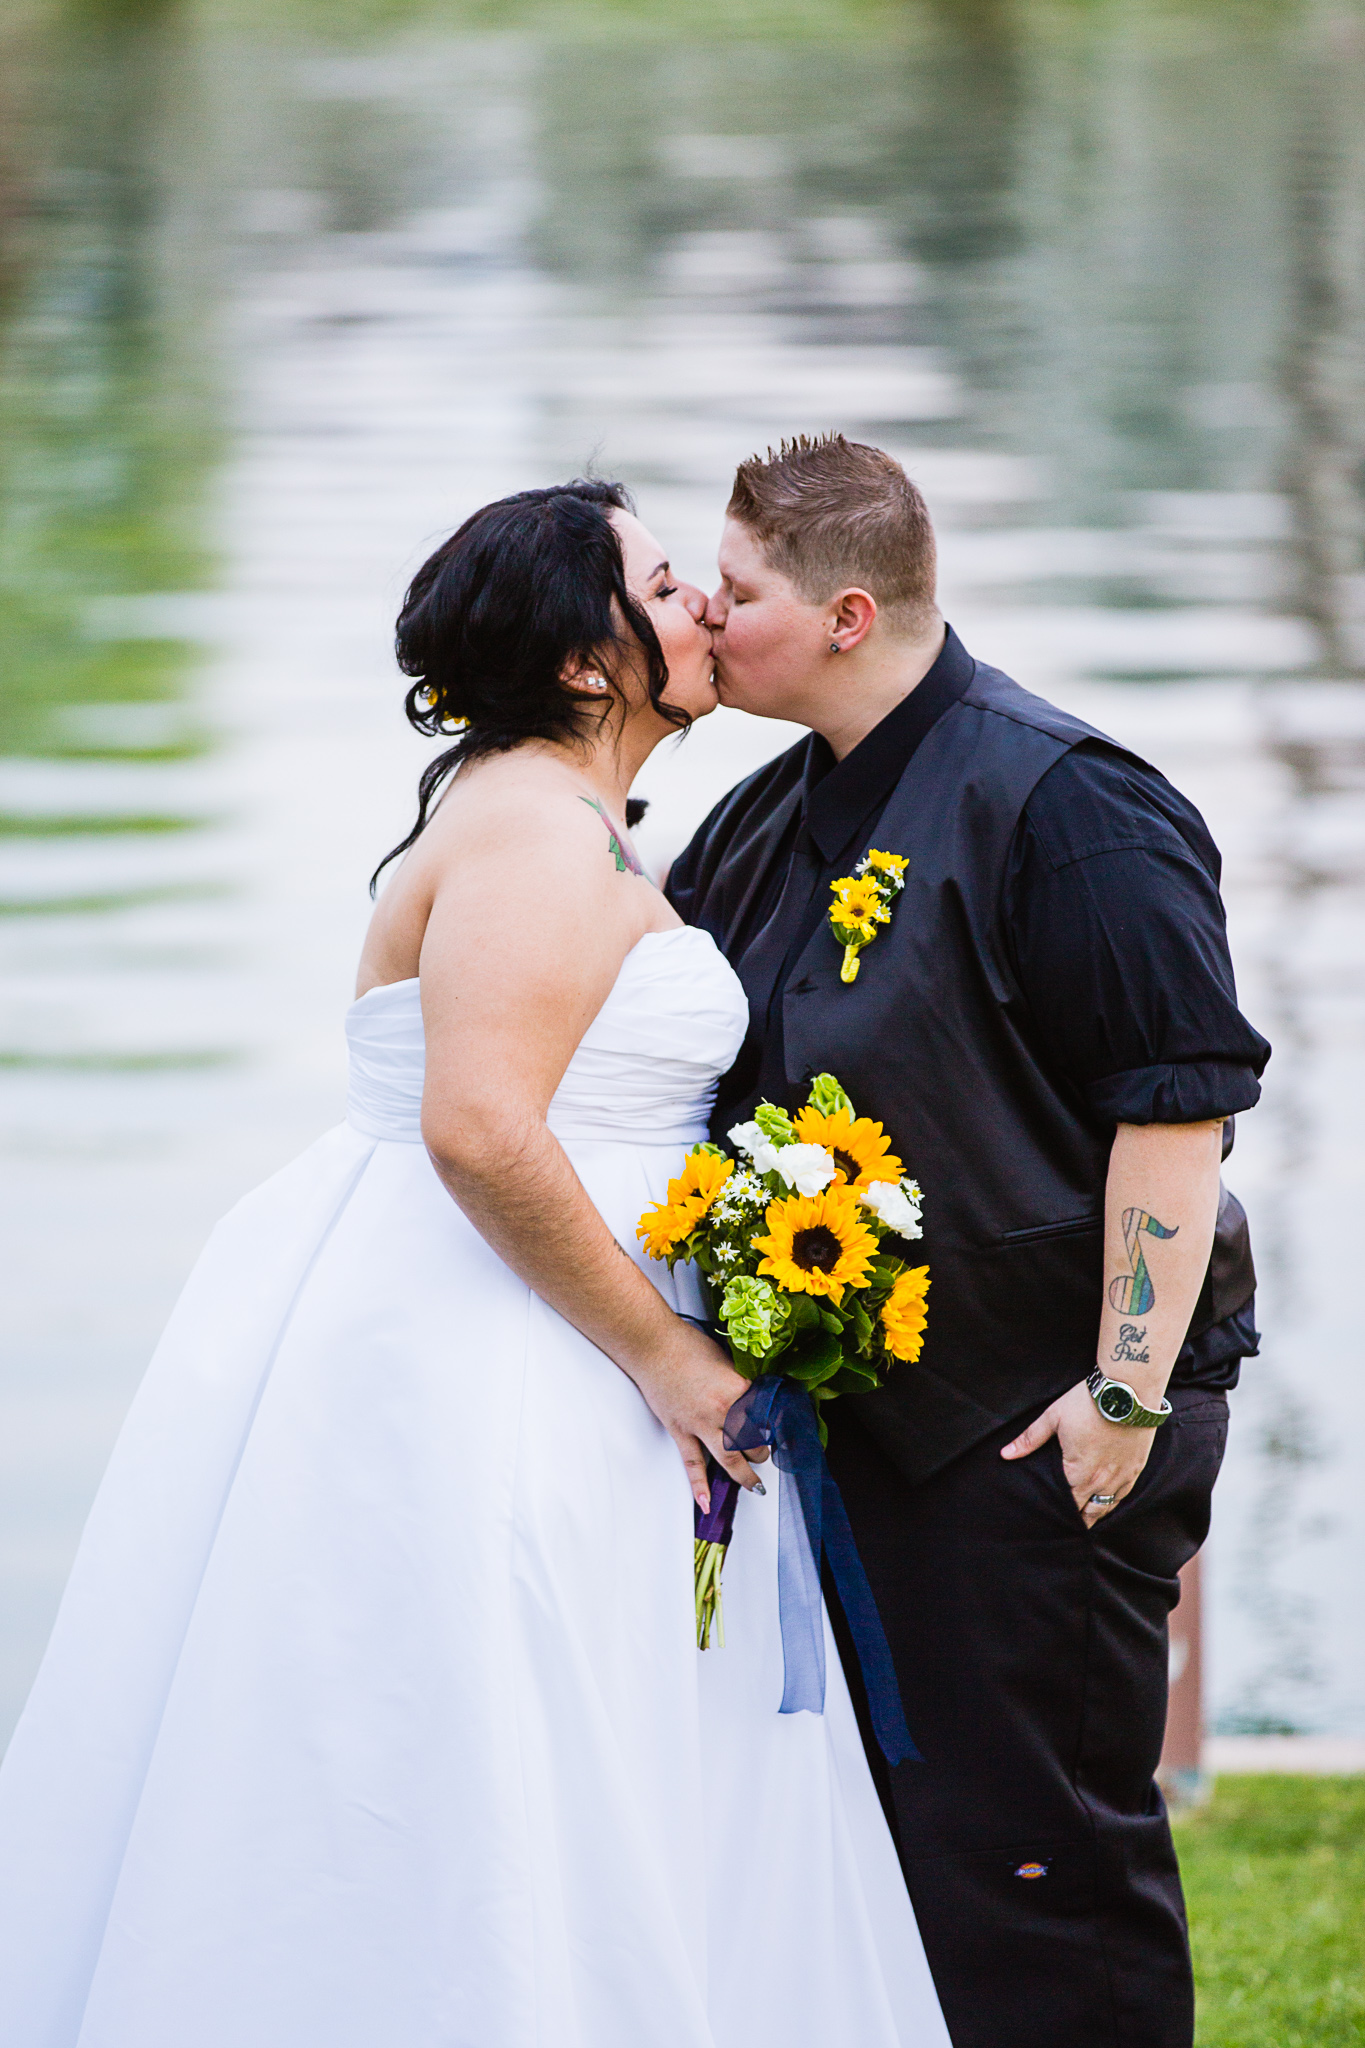 Same sex couple kissing in front of a lake on their wedding day by Phoenix wedding photographers PMA Photography.